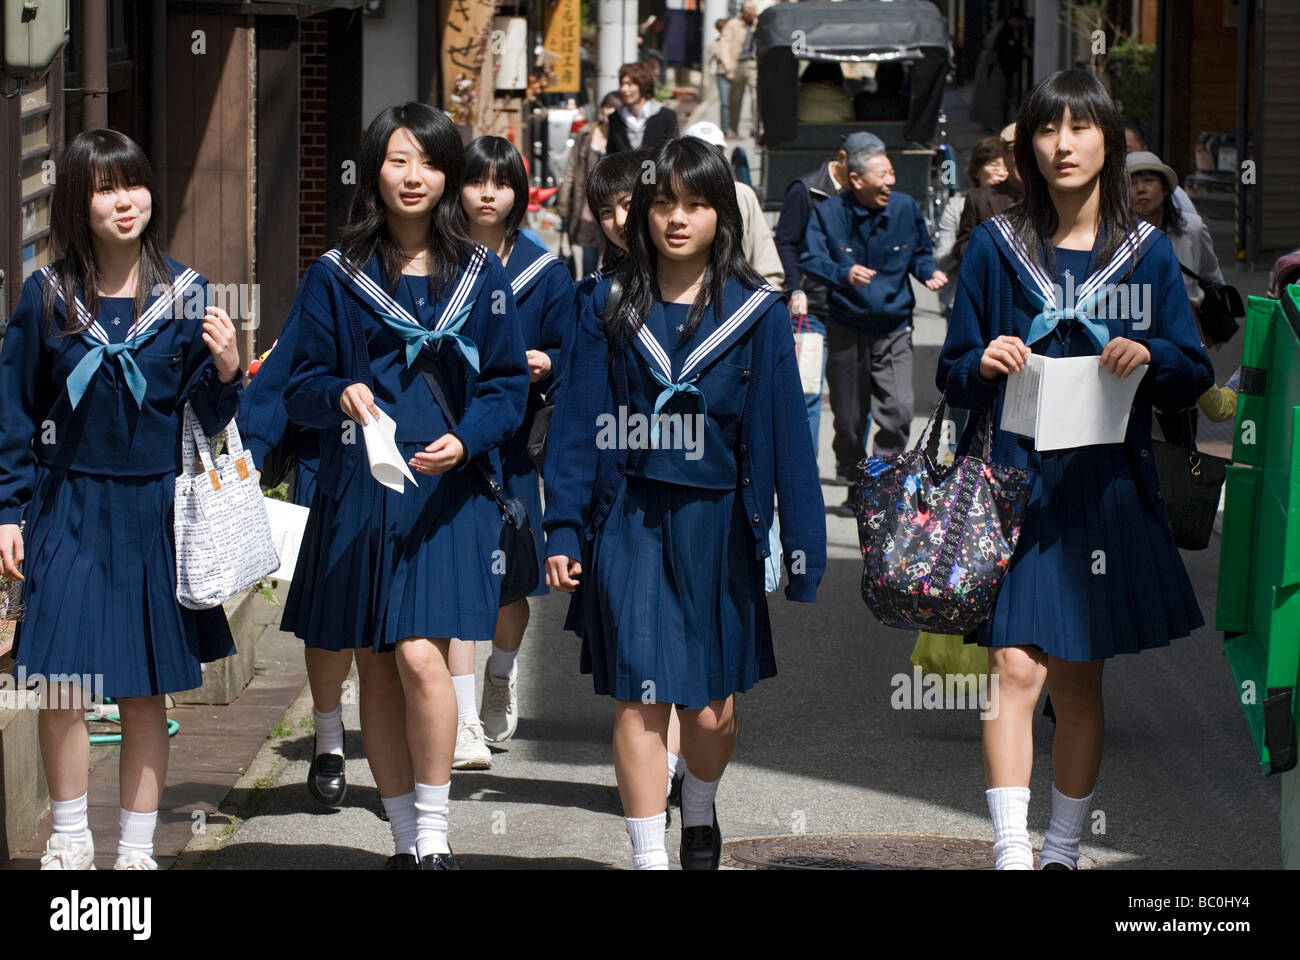 A group of high school girls wearing sailor uniforms enjoying a stroll along a street in Takayama during their school trip Stock Photo